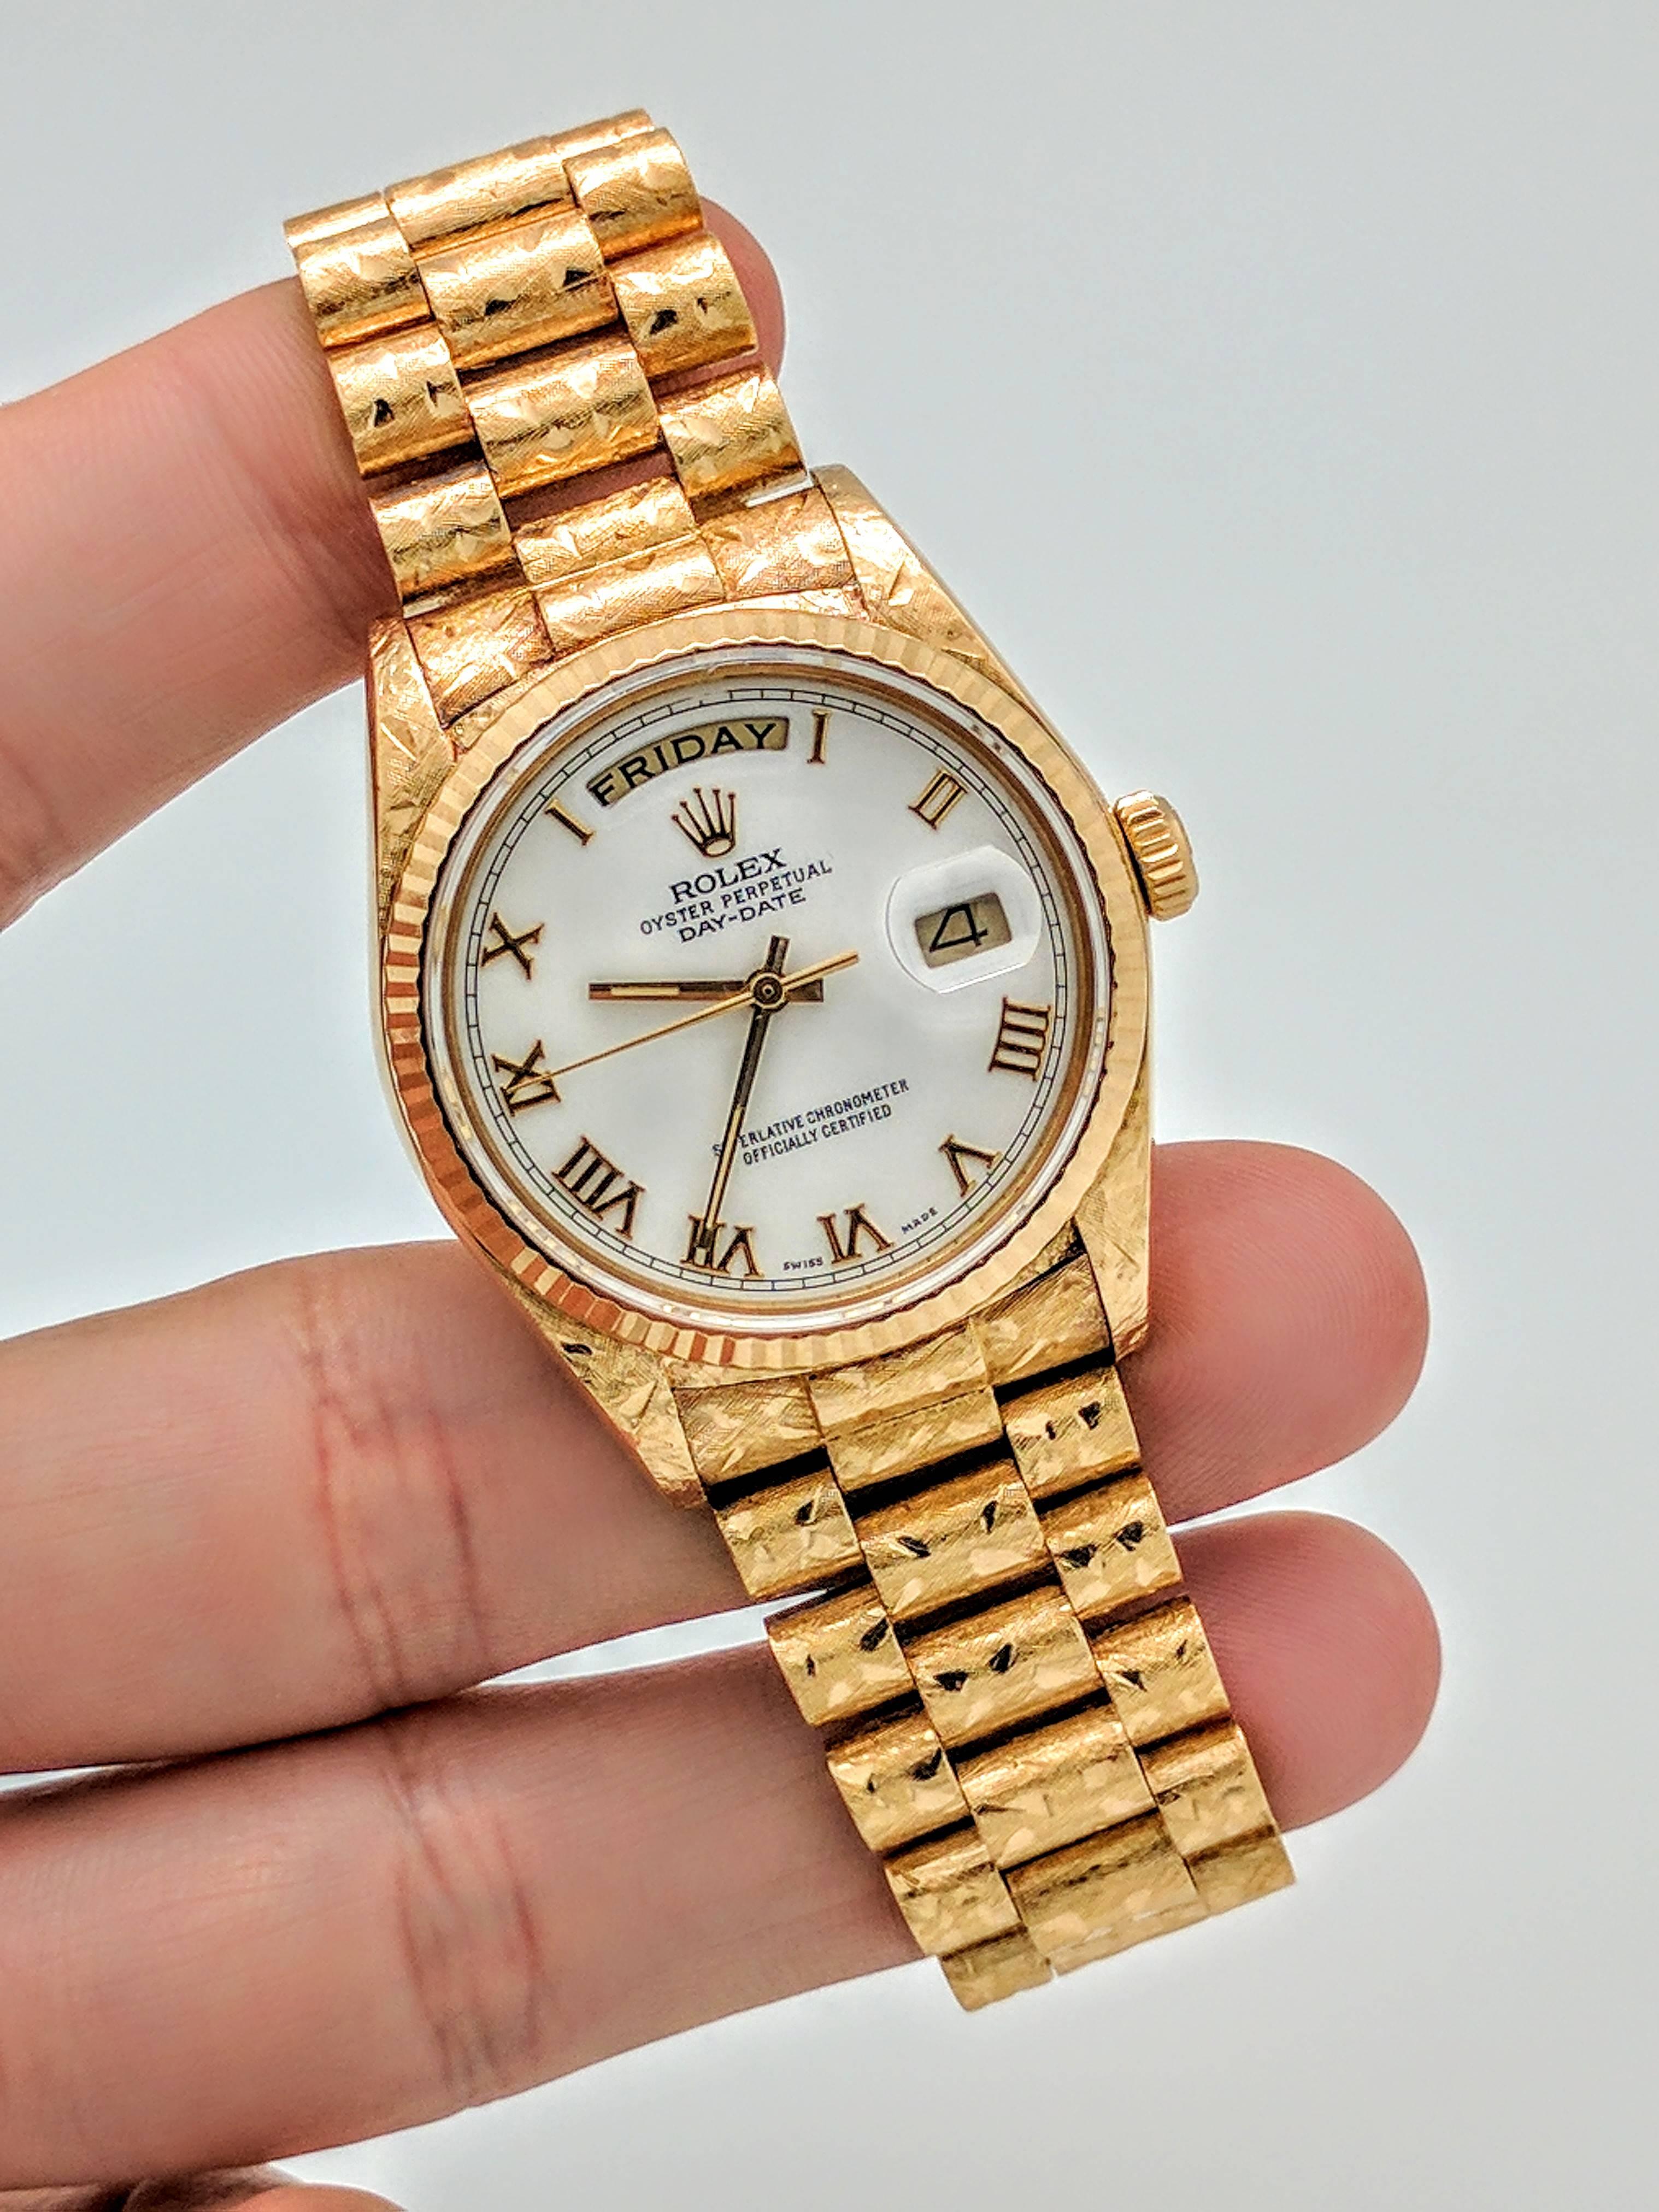 You are viewing an Authentic and all Original 18kyg Rolex Day-Date Presidential Men's Watch. Model: 18038 Serial: 8 Mill (1984-85)


This beautiful and RARE watch is solid 18k yellow gold and features an original Rolex white dial with gold Roman